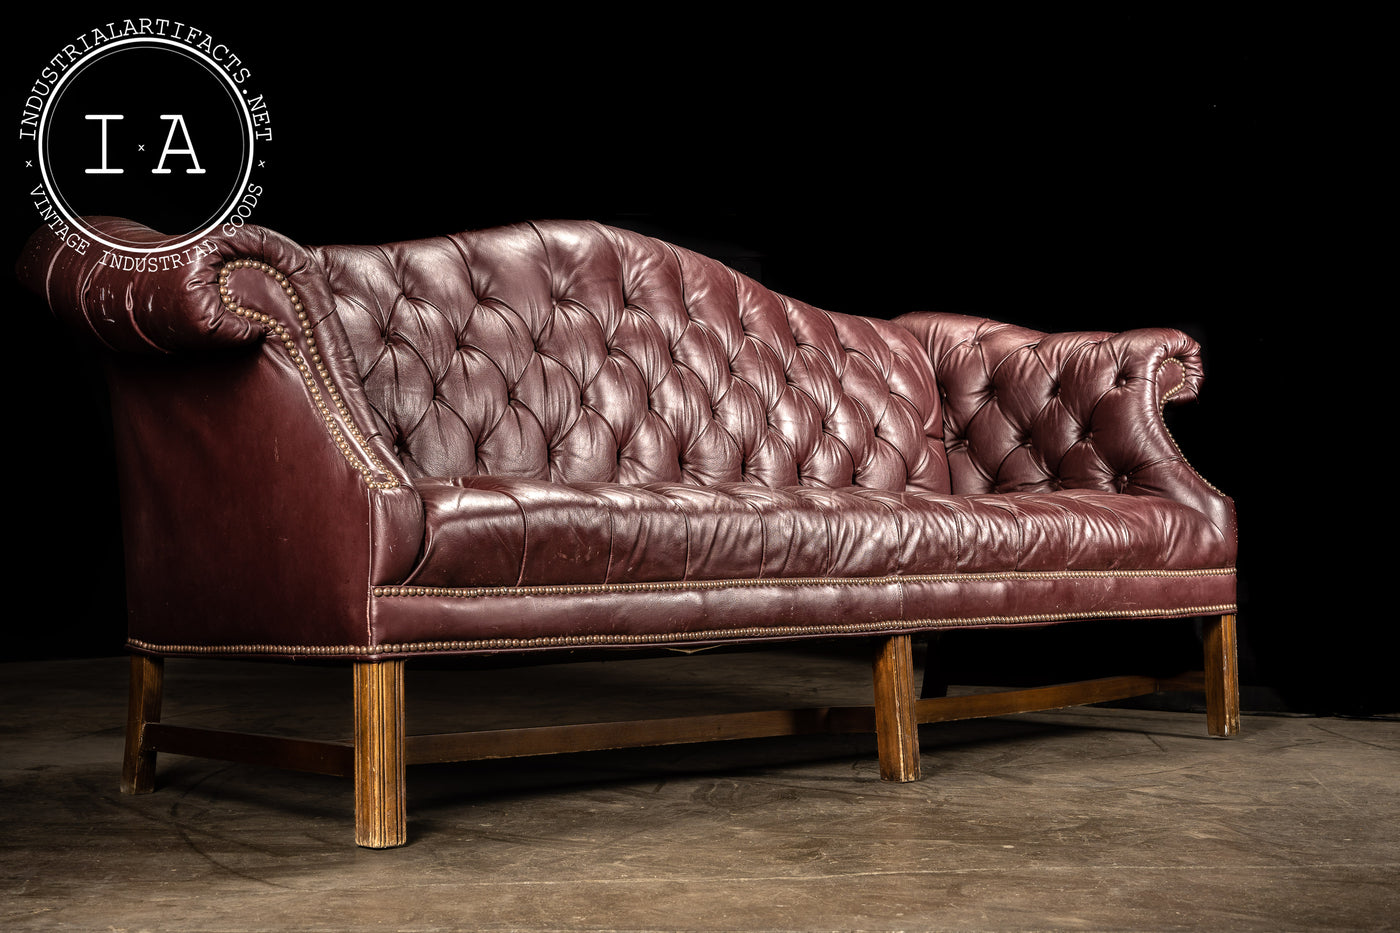 Vintage Chippendale Burgundy Tufted Leather Sofa